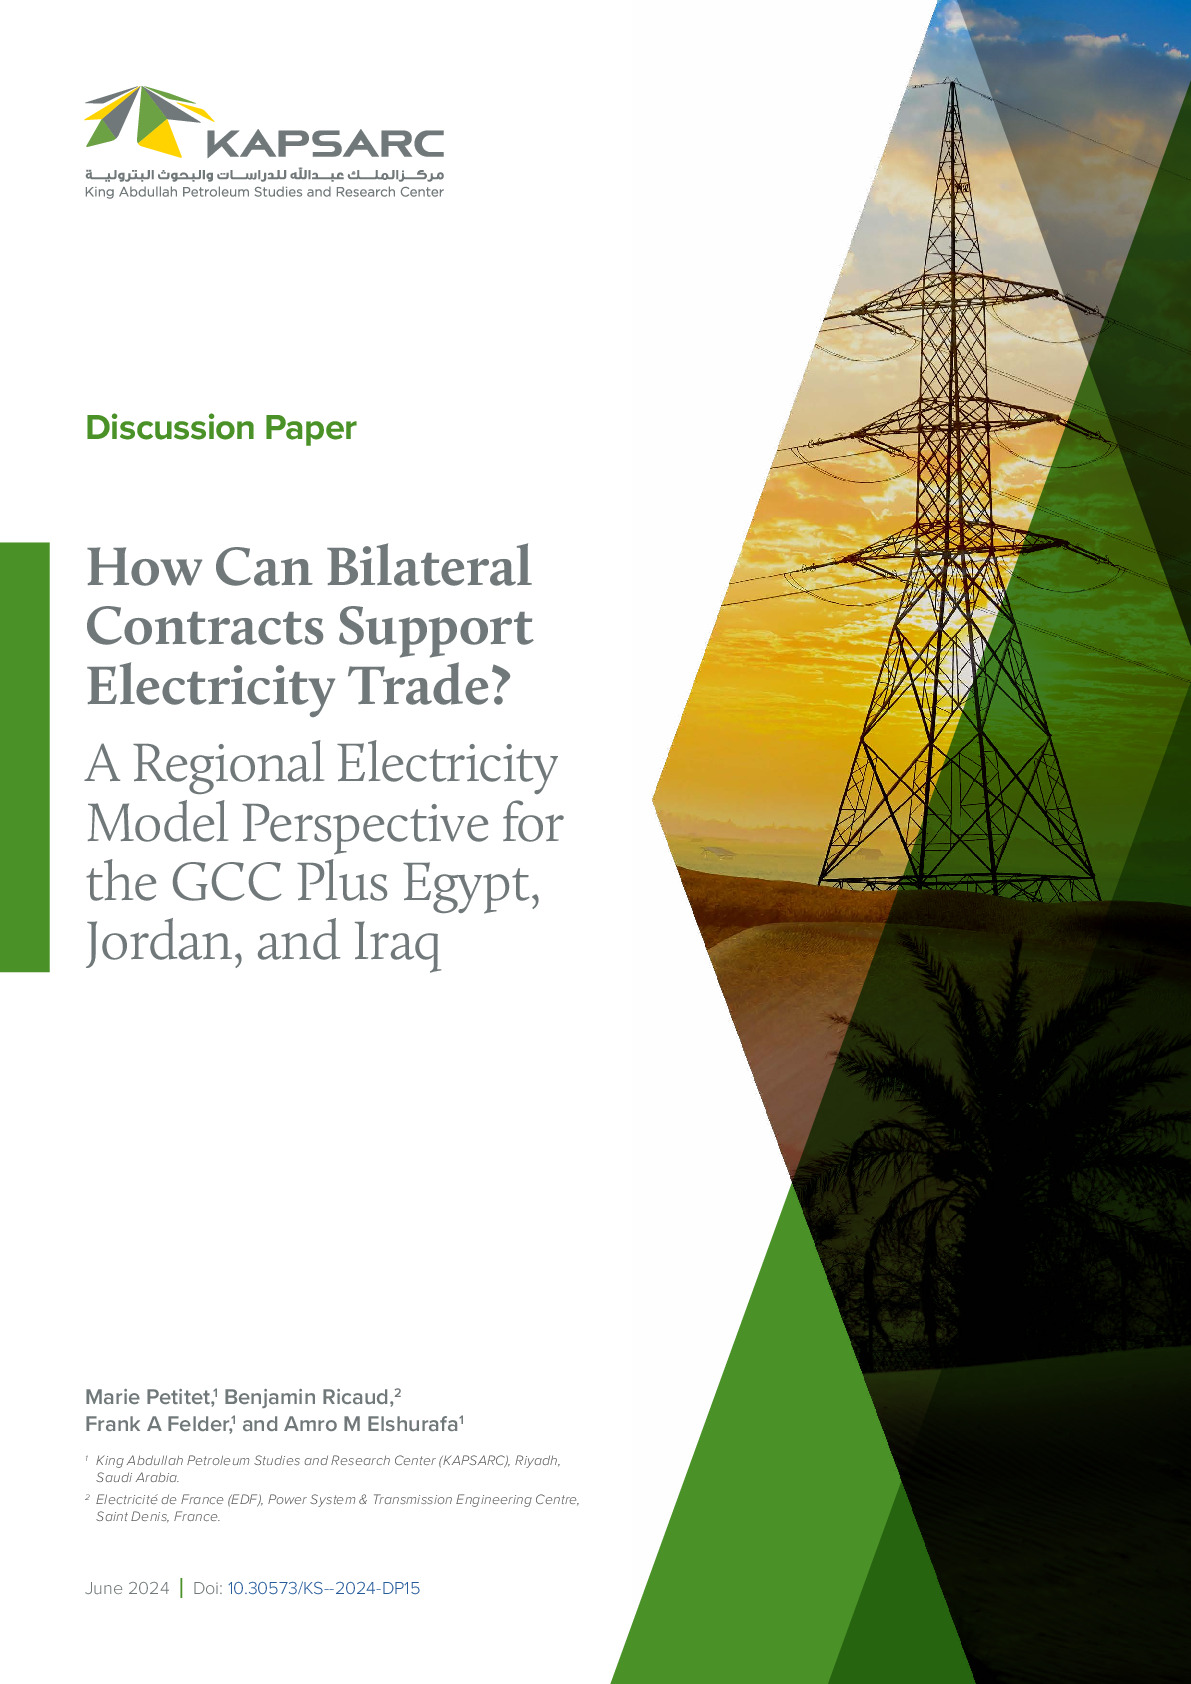 How Can Bilateral Contracts Support Electricity Trade? A Regional Electricity Model Perspective for the GCC Plus Egypt, Jordan, and Iraq